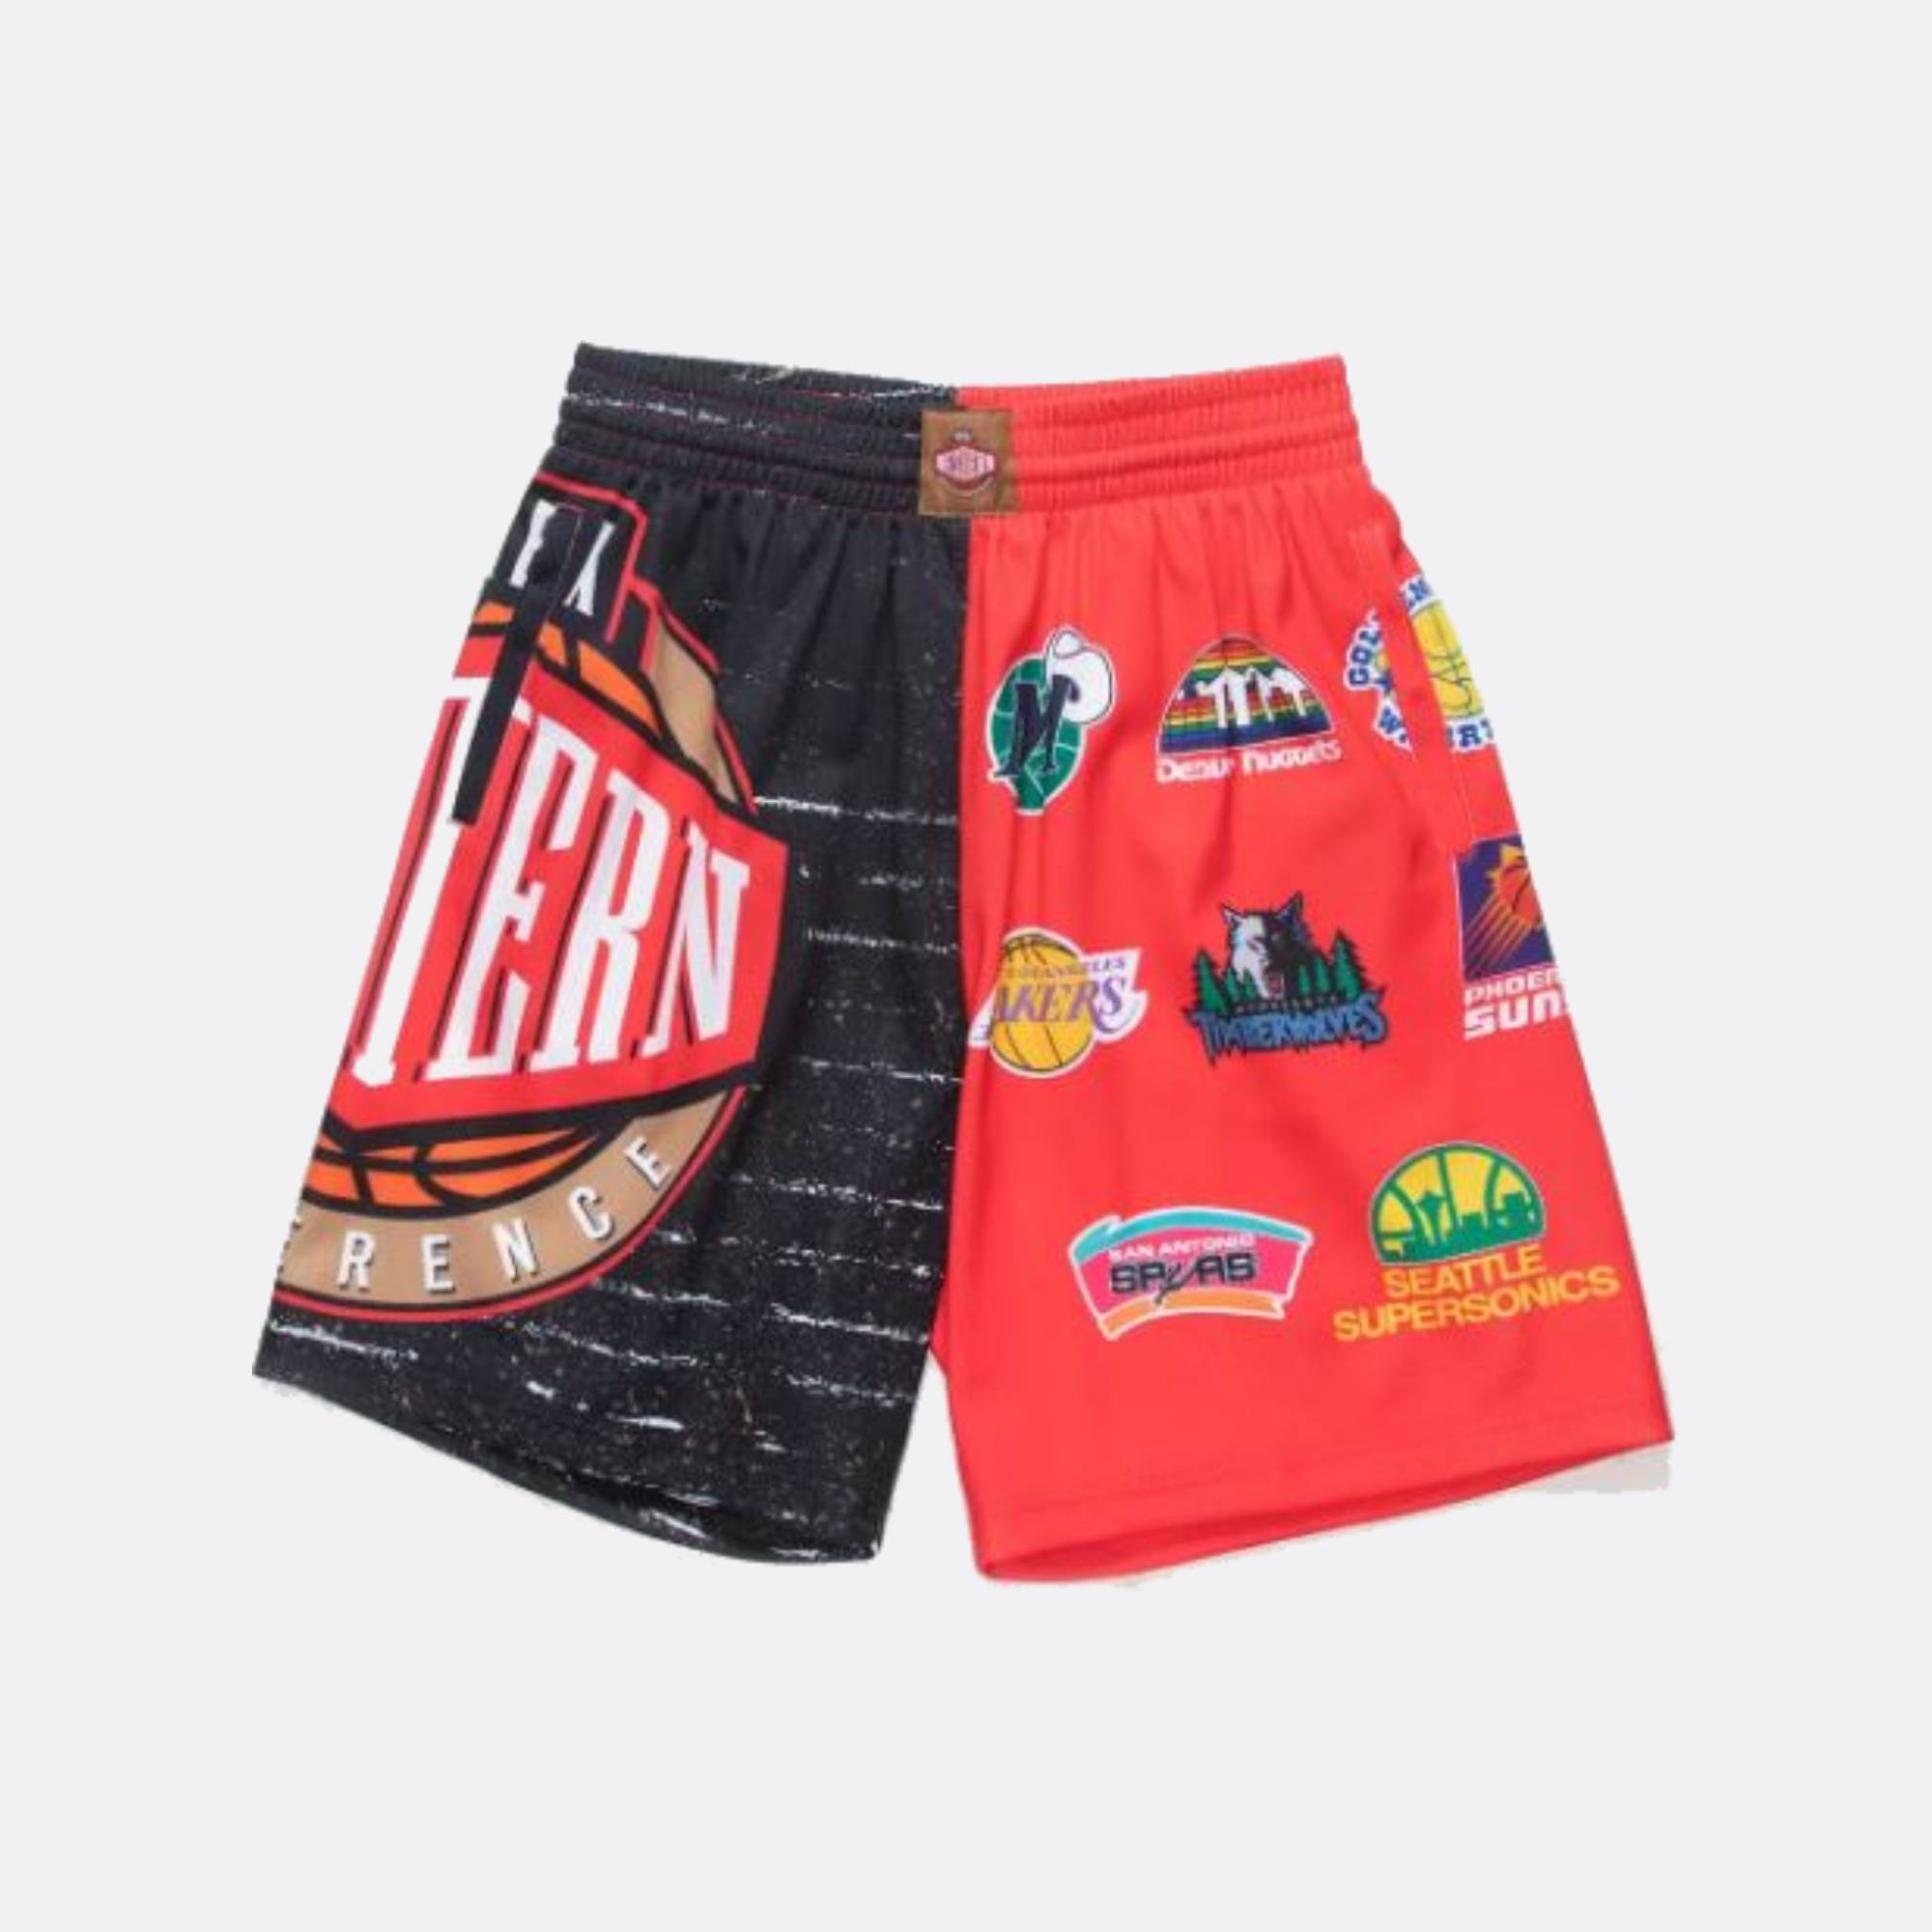 Just Don Bulls Shorts in Red for Men